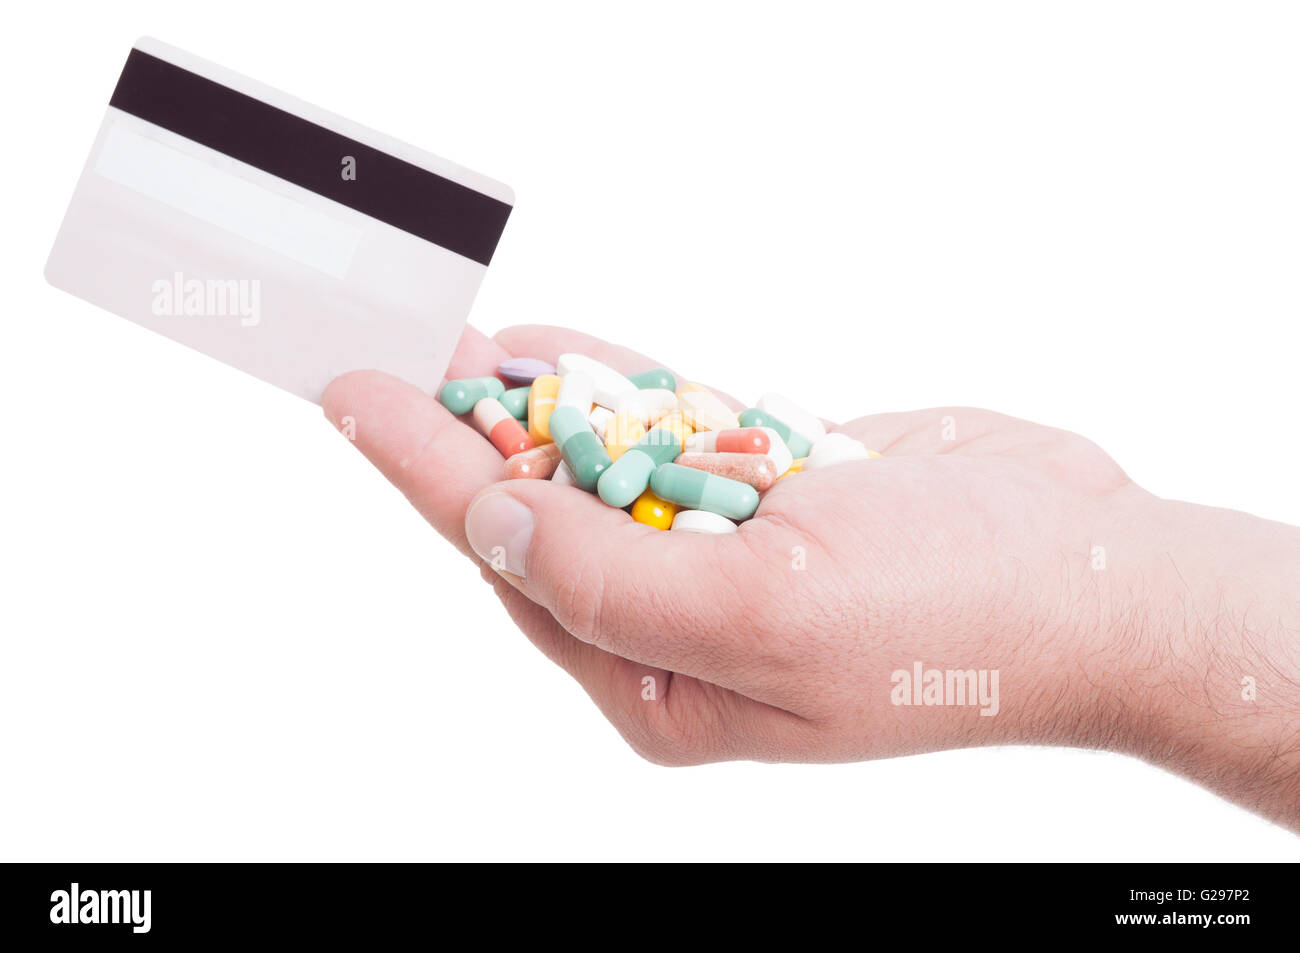 Pay for pills or medication with credit card. Online shopping on internet website pharmacy Stock Photo